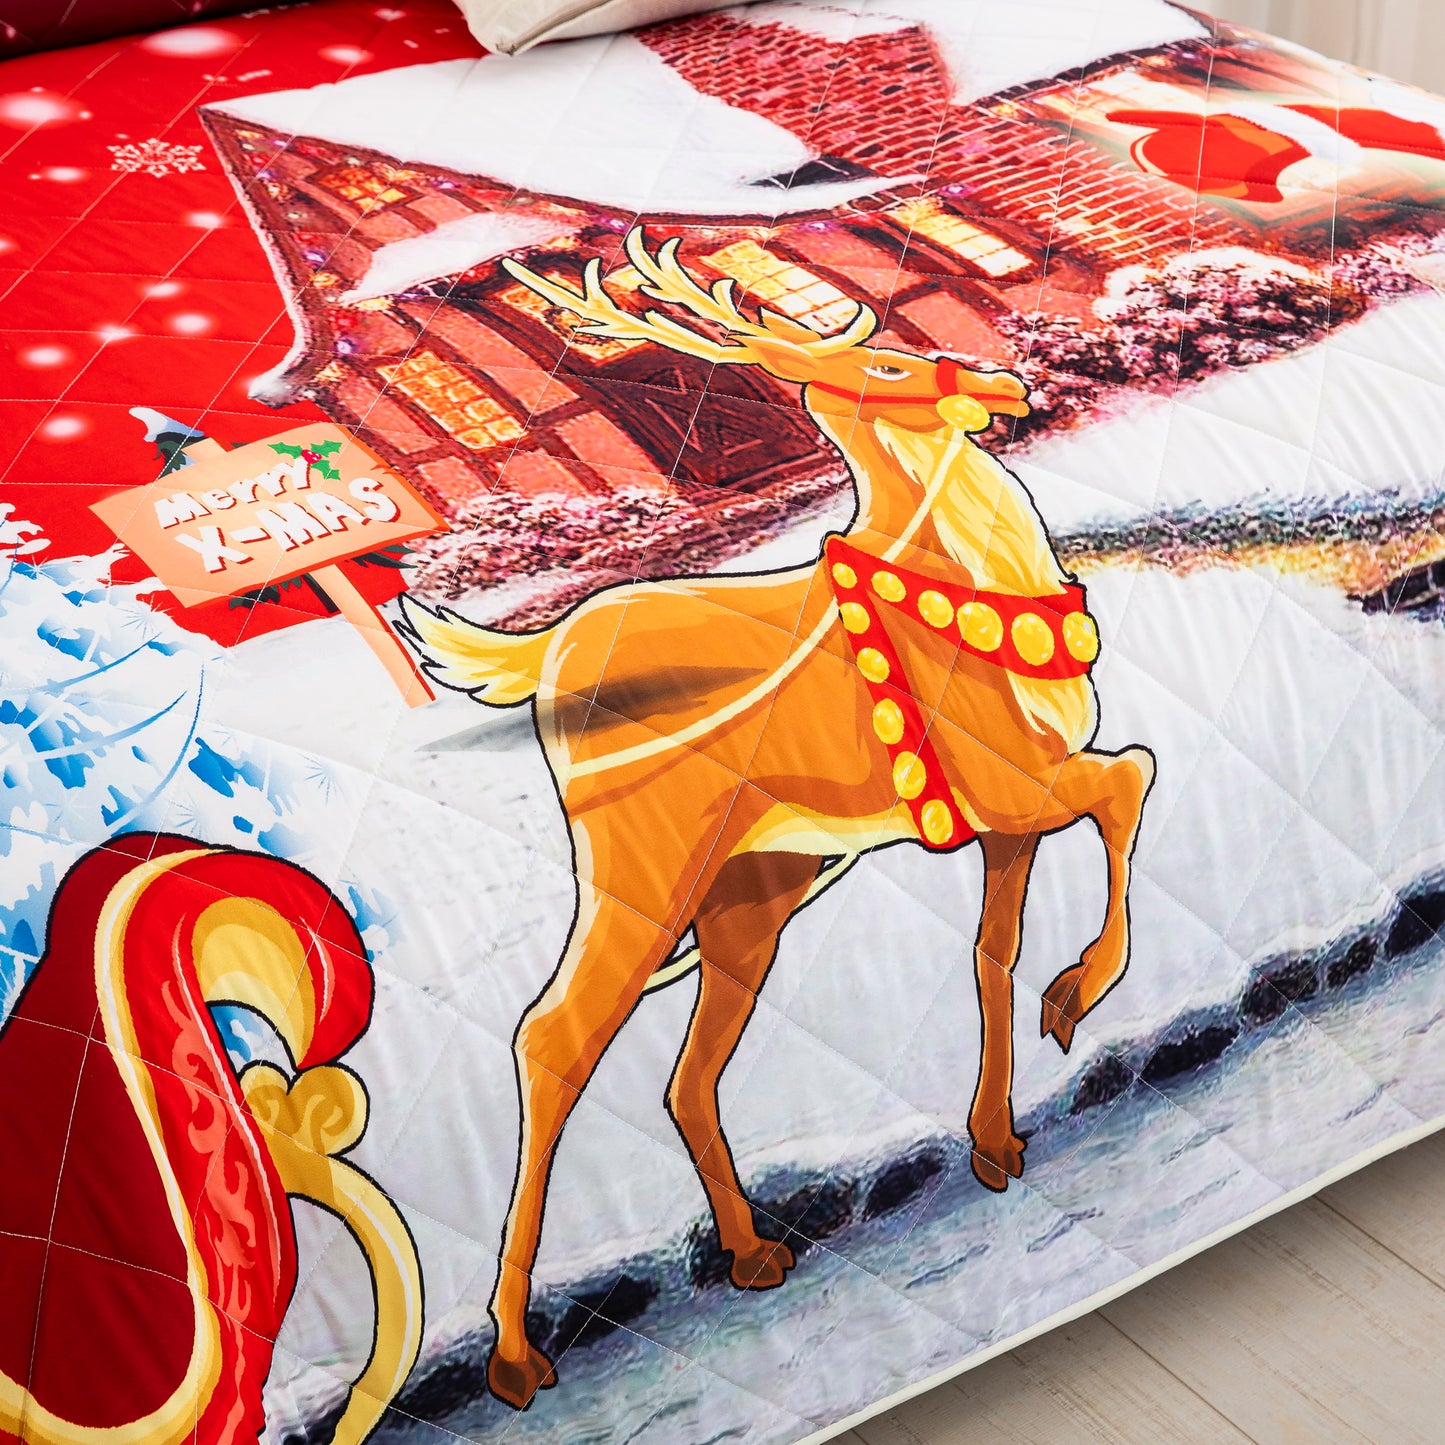 Santa Claus Christmas Style Quilt Set with 2 Pillowcases